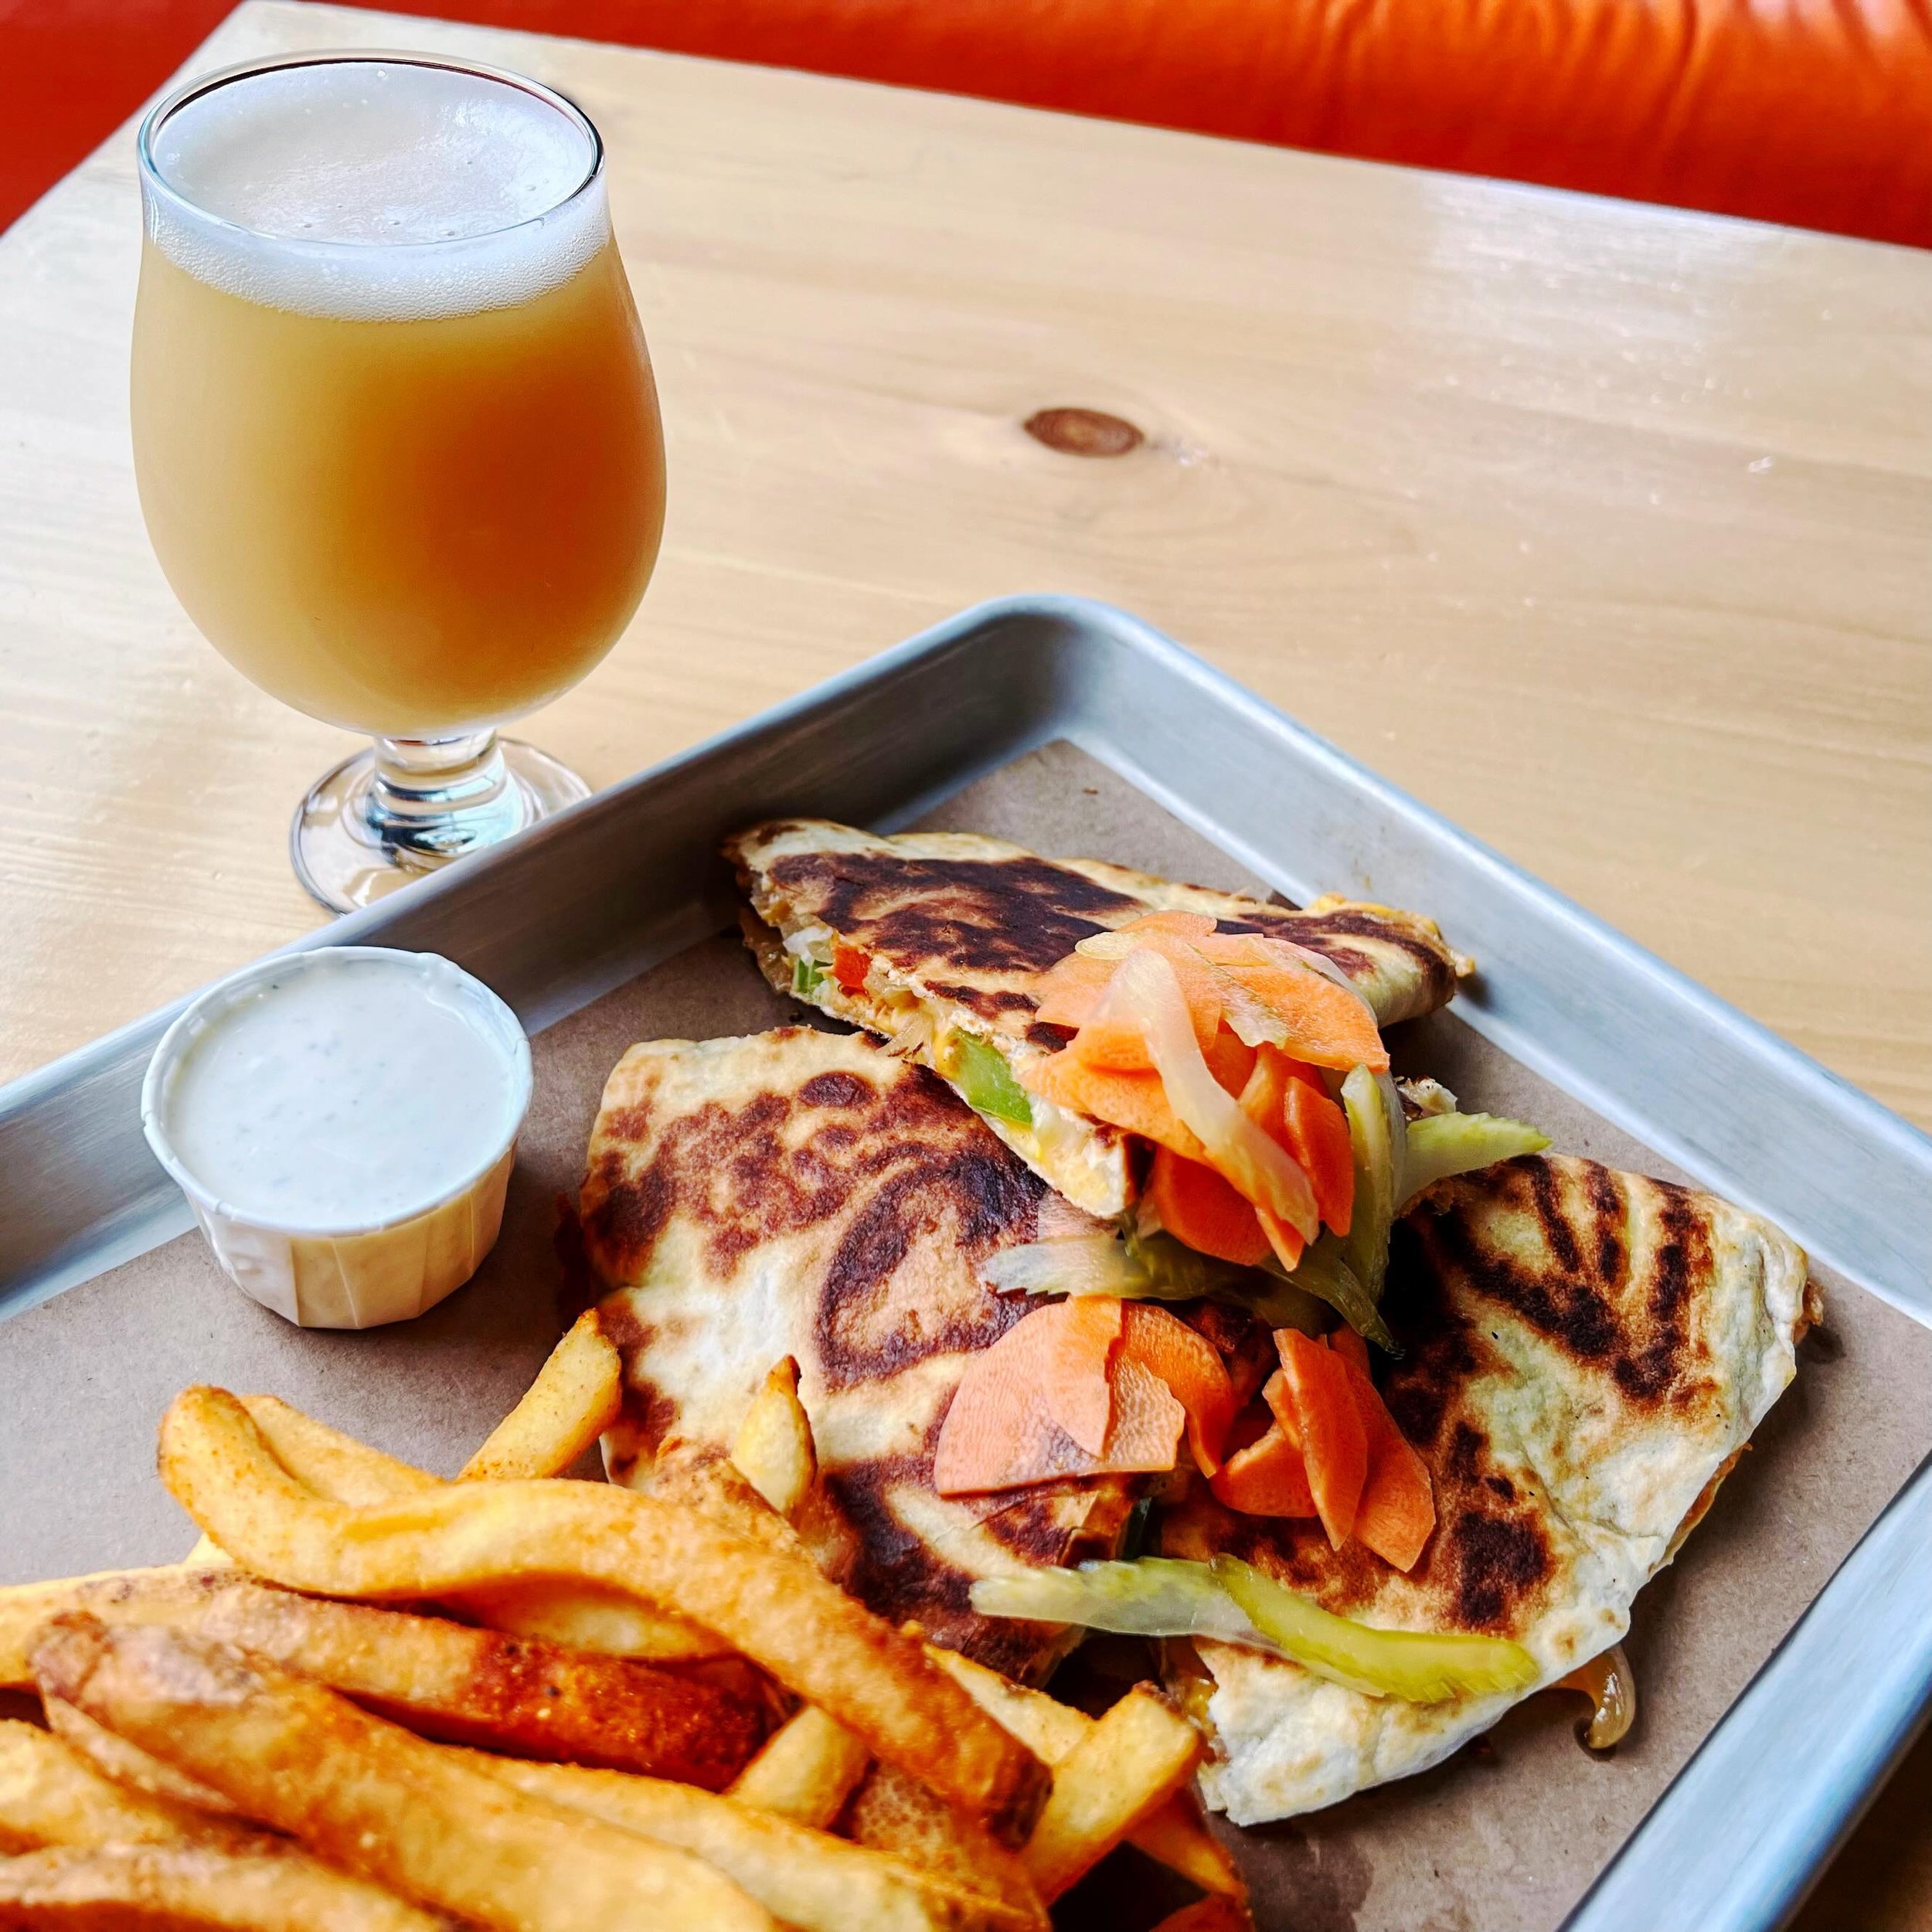 🧀 The Ultimate Cheese-terpiece! 🌮 

Our lunch special this week  will just melting away your problems, one delicious bite at a time.

🦬 Buffalo Chicken Quesadilla
Buffalo chicken confit, peppers, onions, jack and American cheeses topped with pickl